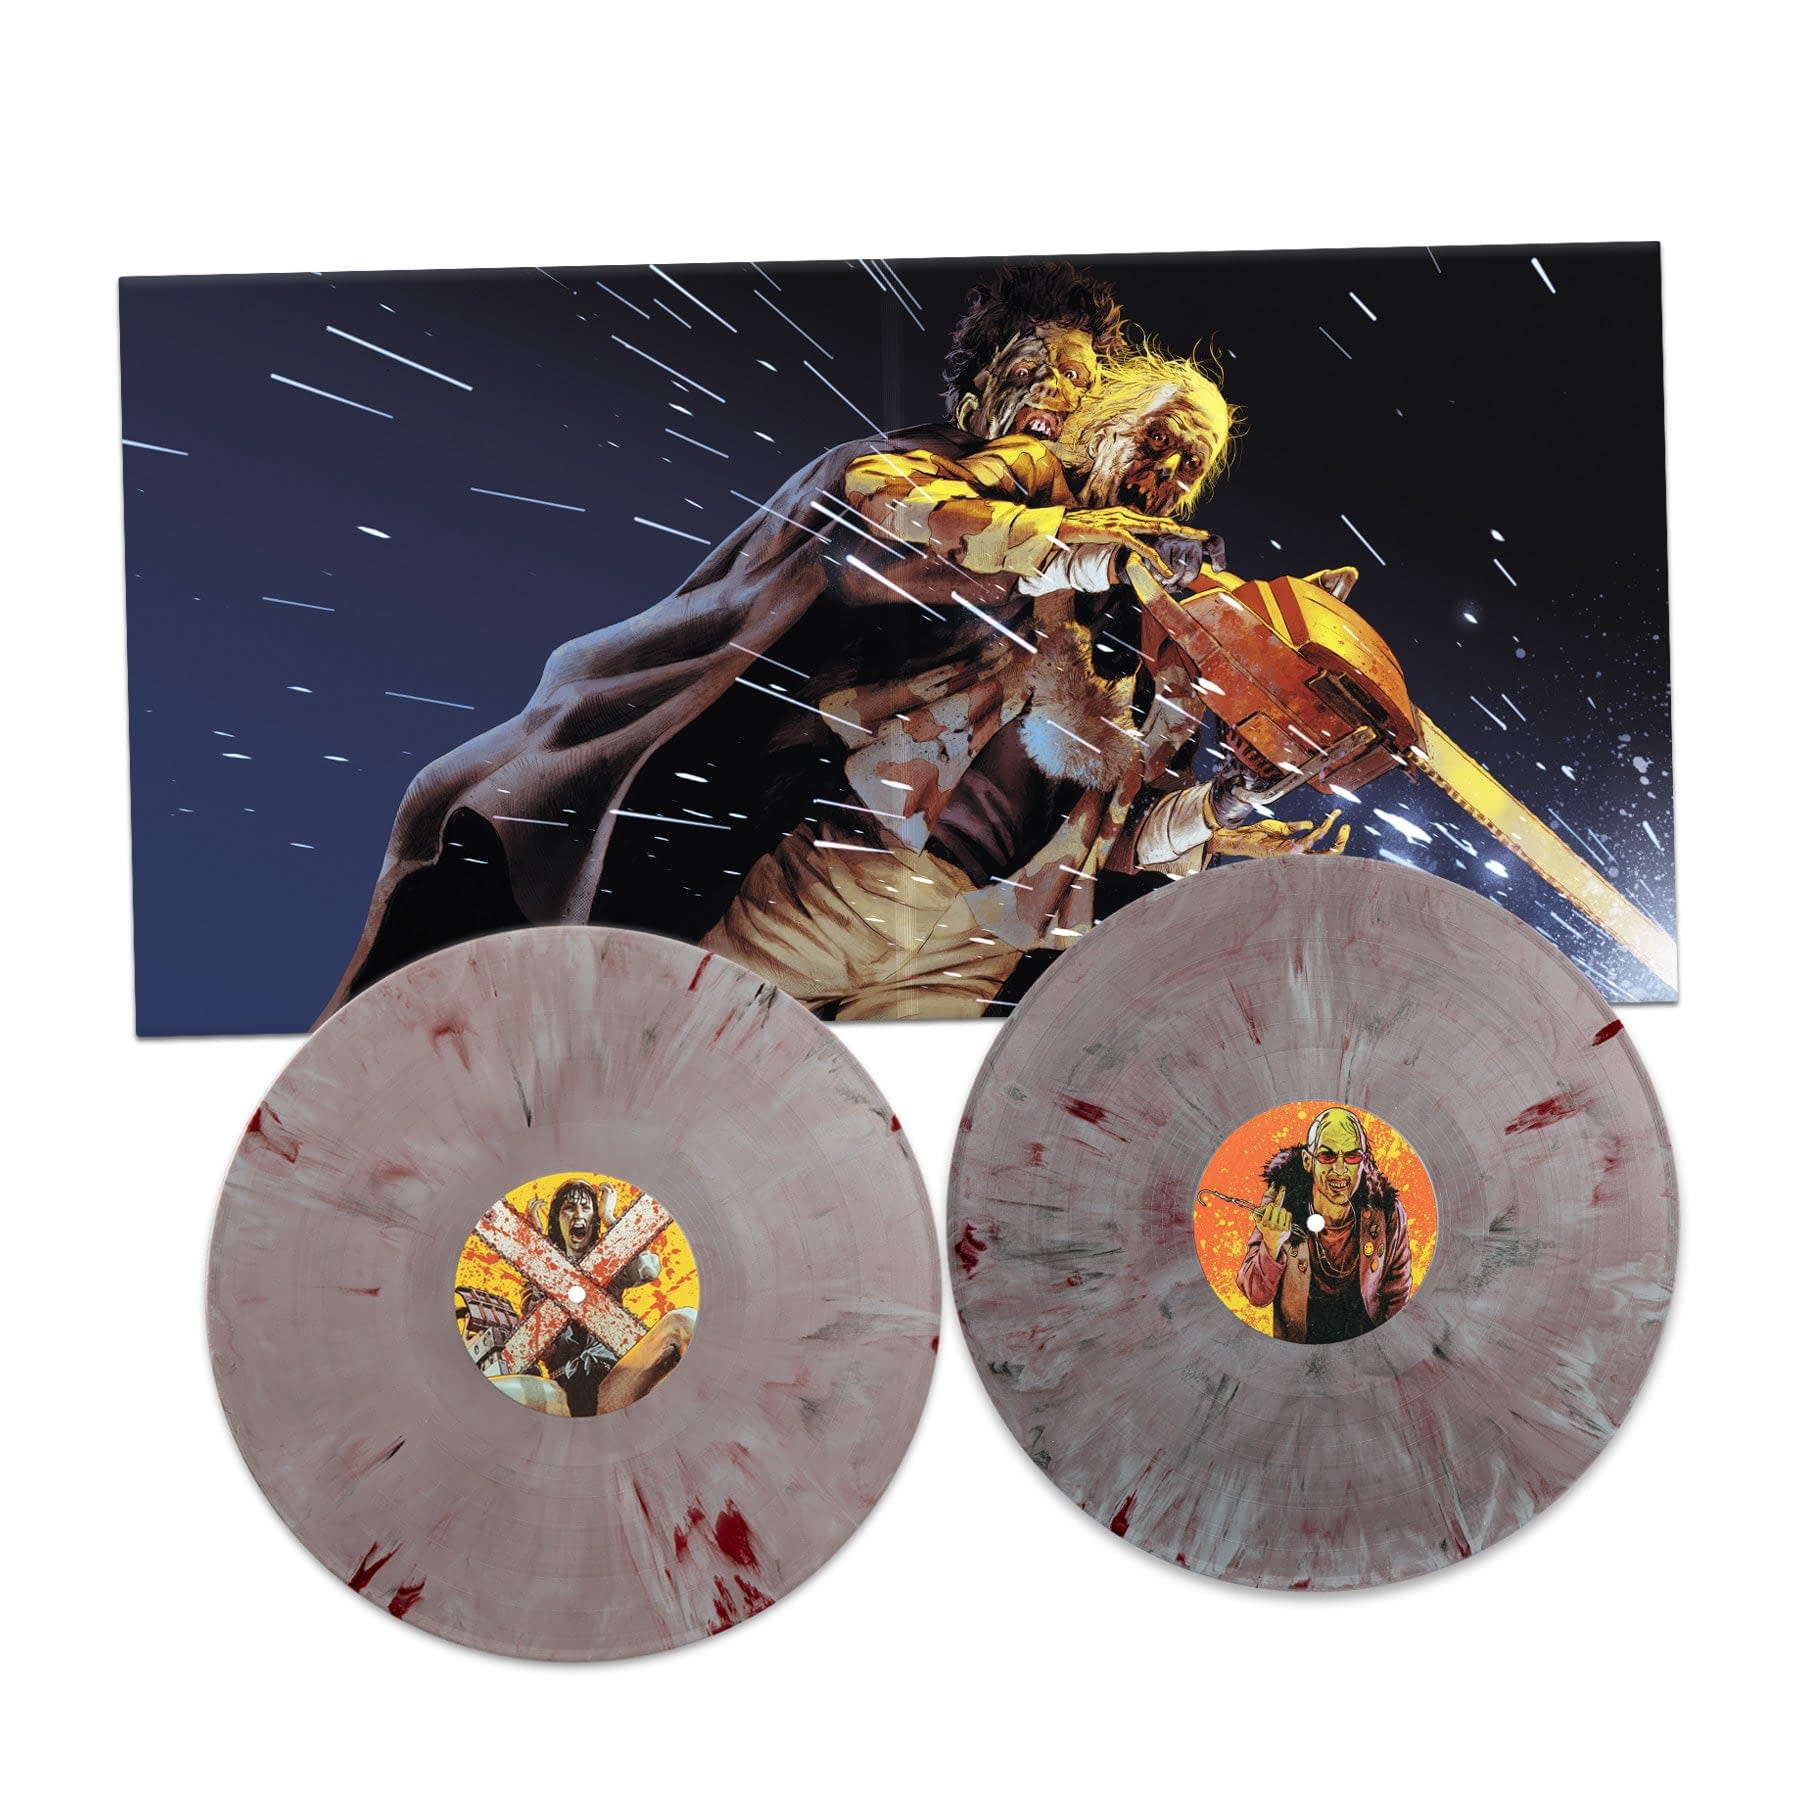 Texas Chainsaw Massacre 2 Soundtrack Up For Order At Waxwork